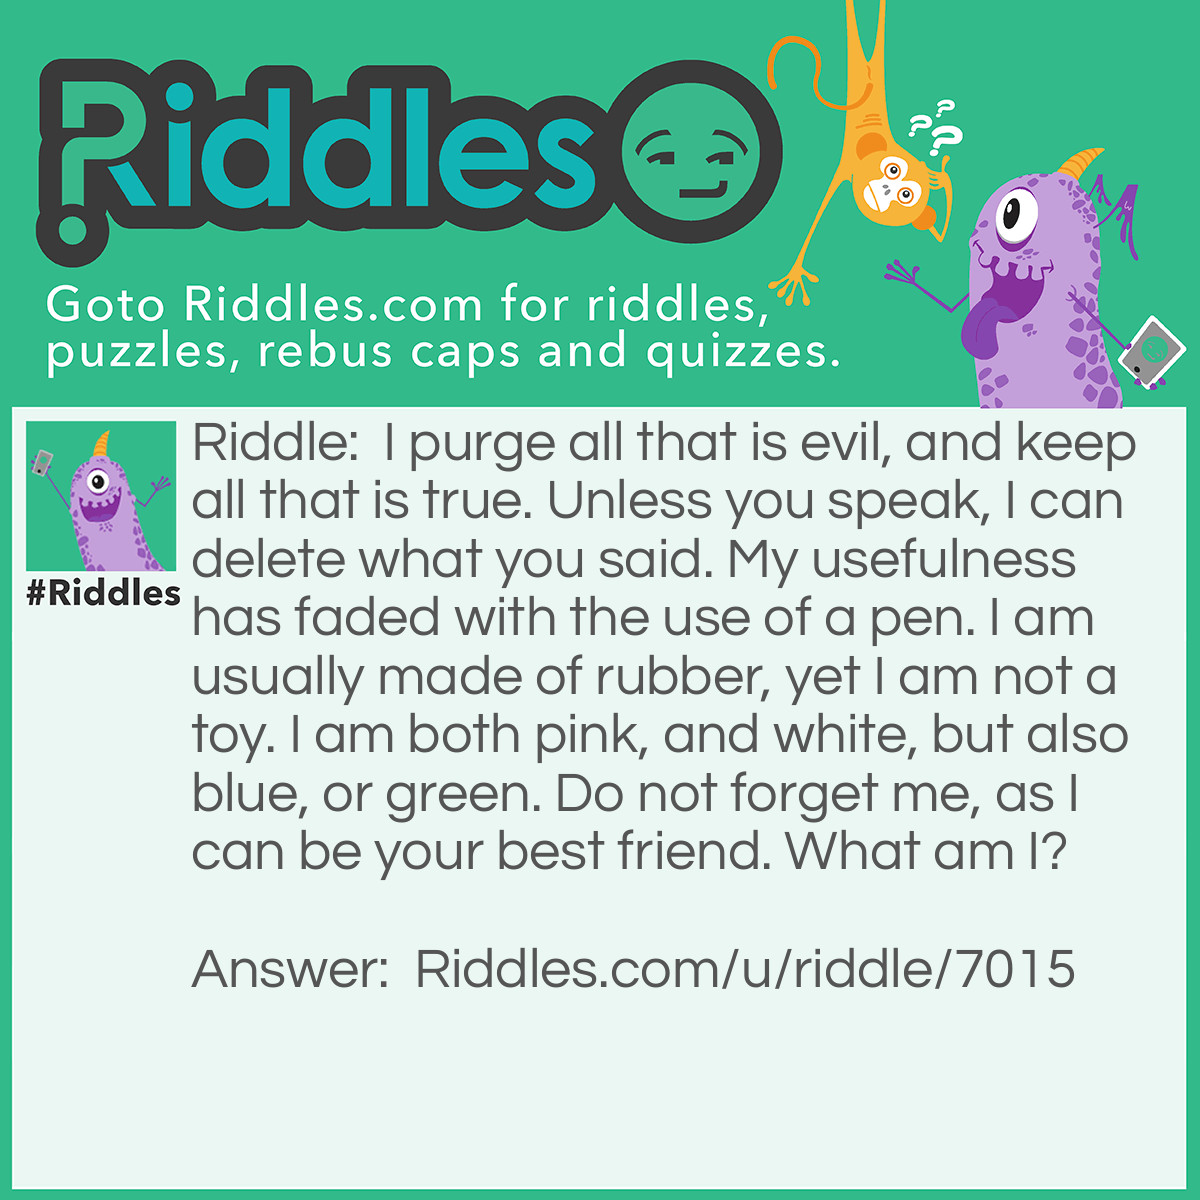 Riddle: I purge all that is evil, and keep all that is true. Unless you speak, I can delete what you said. My usefulness has faded with the use of a pen. I am usually made of rubber, yet I am not a toy. I am both pink, and white, but also blue, or green. Do not forget me, as I can be your best friend. What am I? Answer: An eraser.